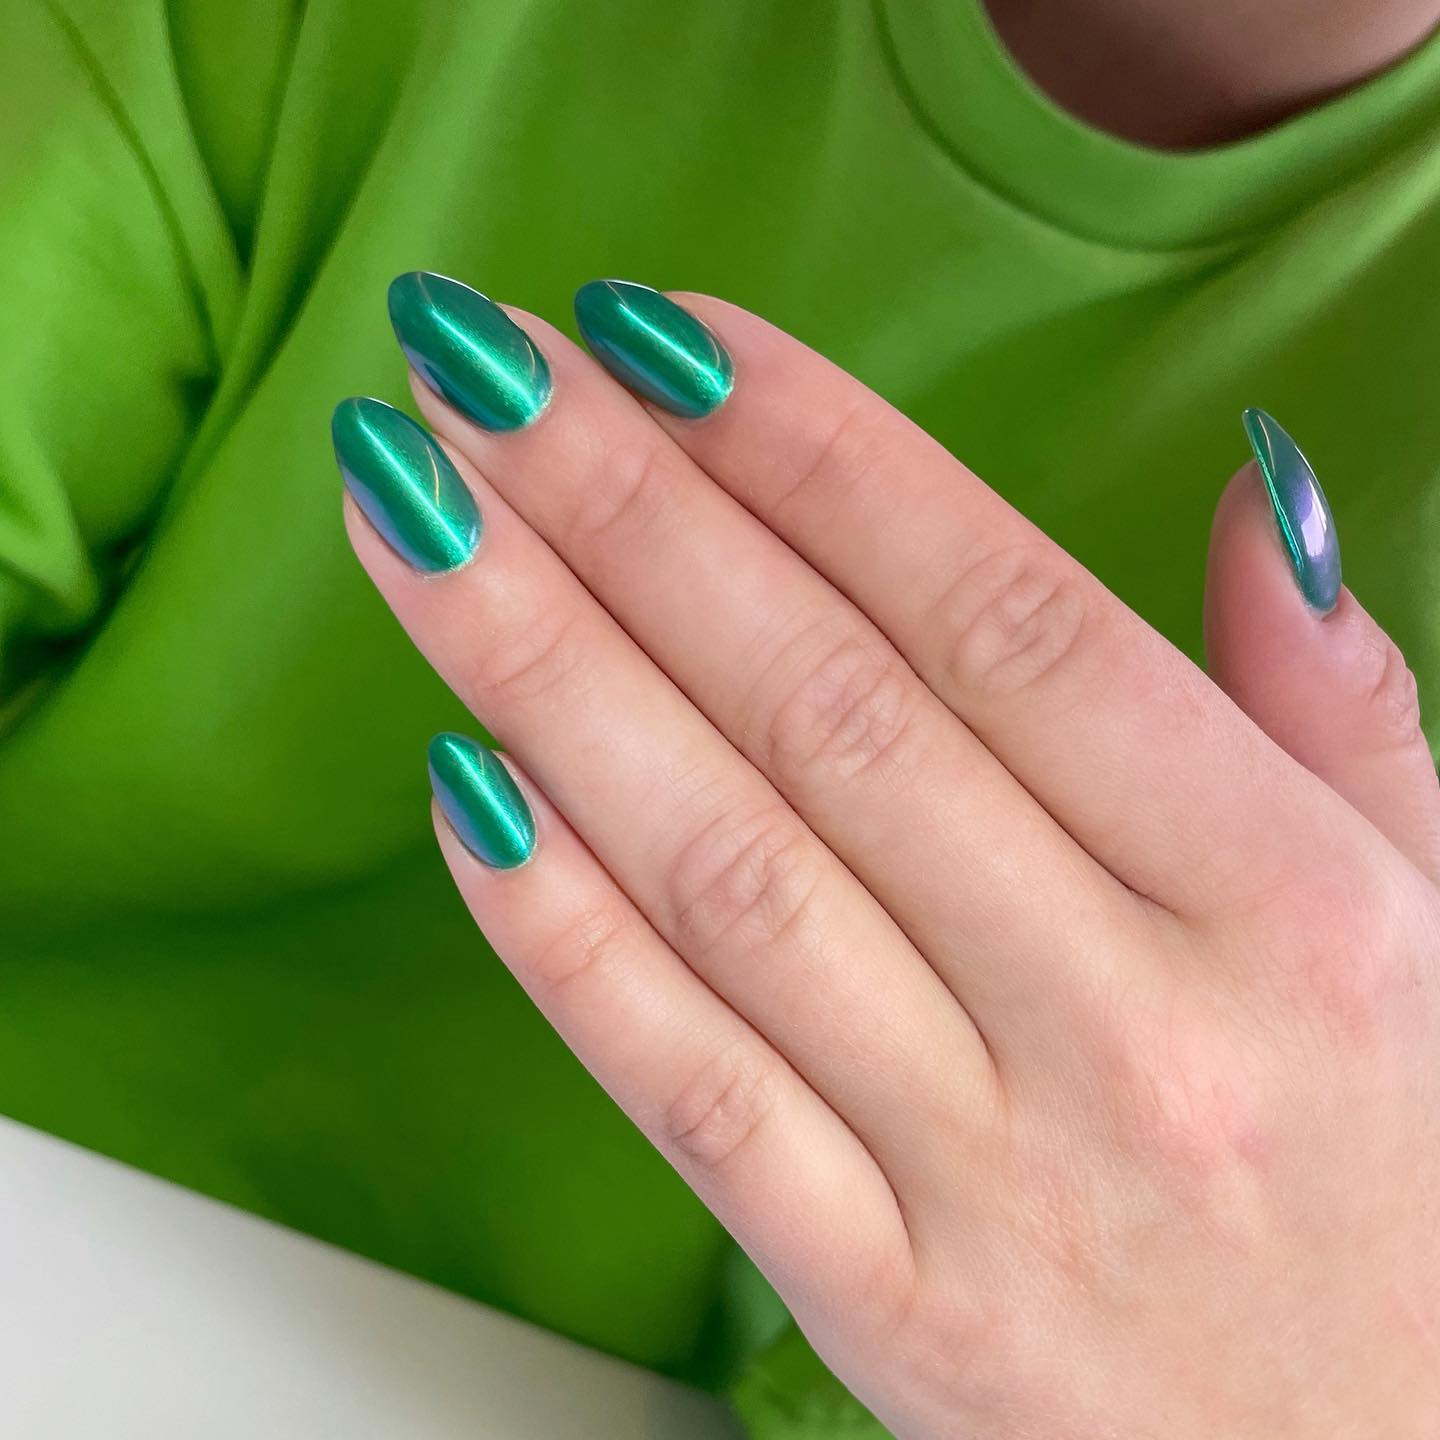 If you want to shine all the time, this green chrome nails are here for you. Isn't it gorgeous?